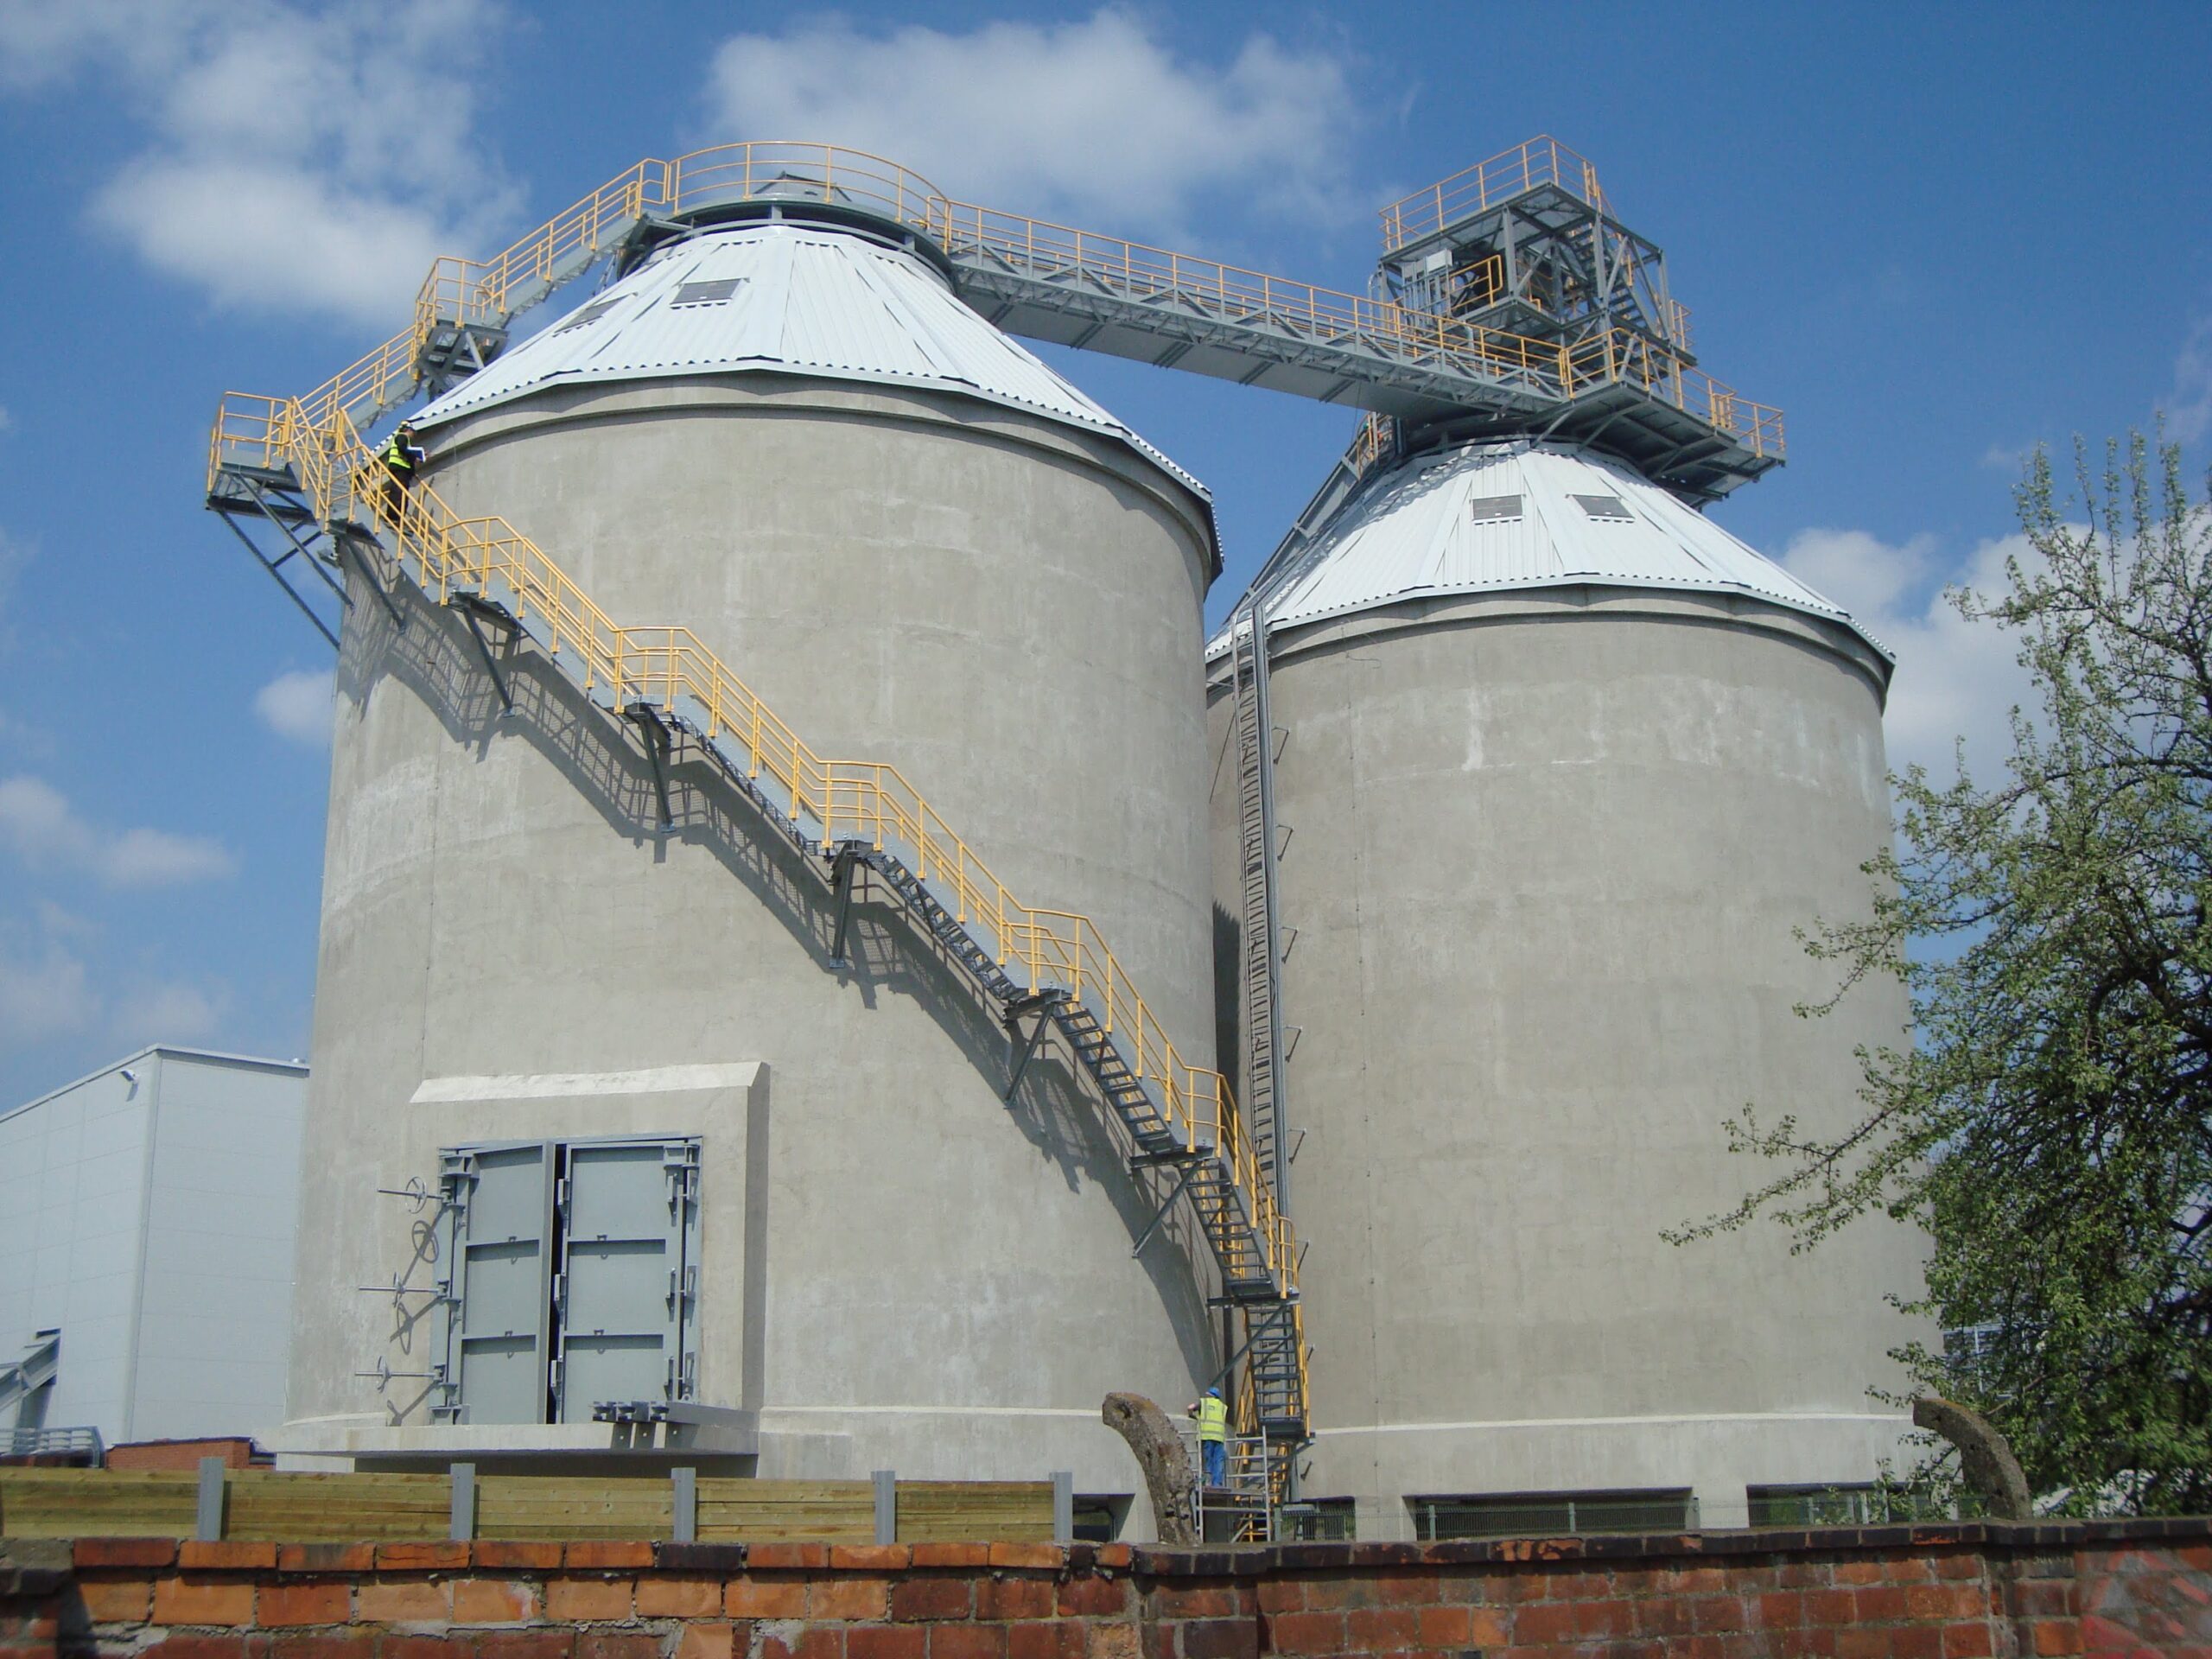 Round silo discharge system with two silos